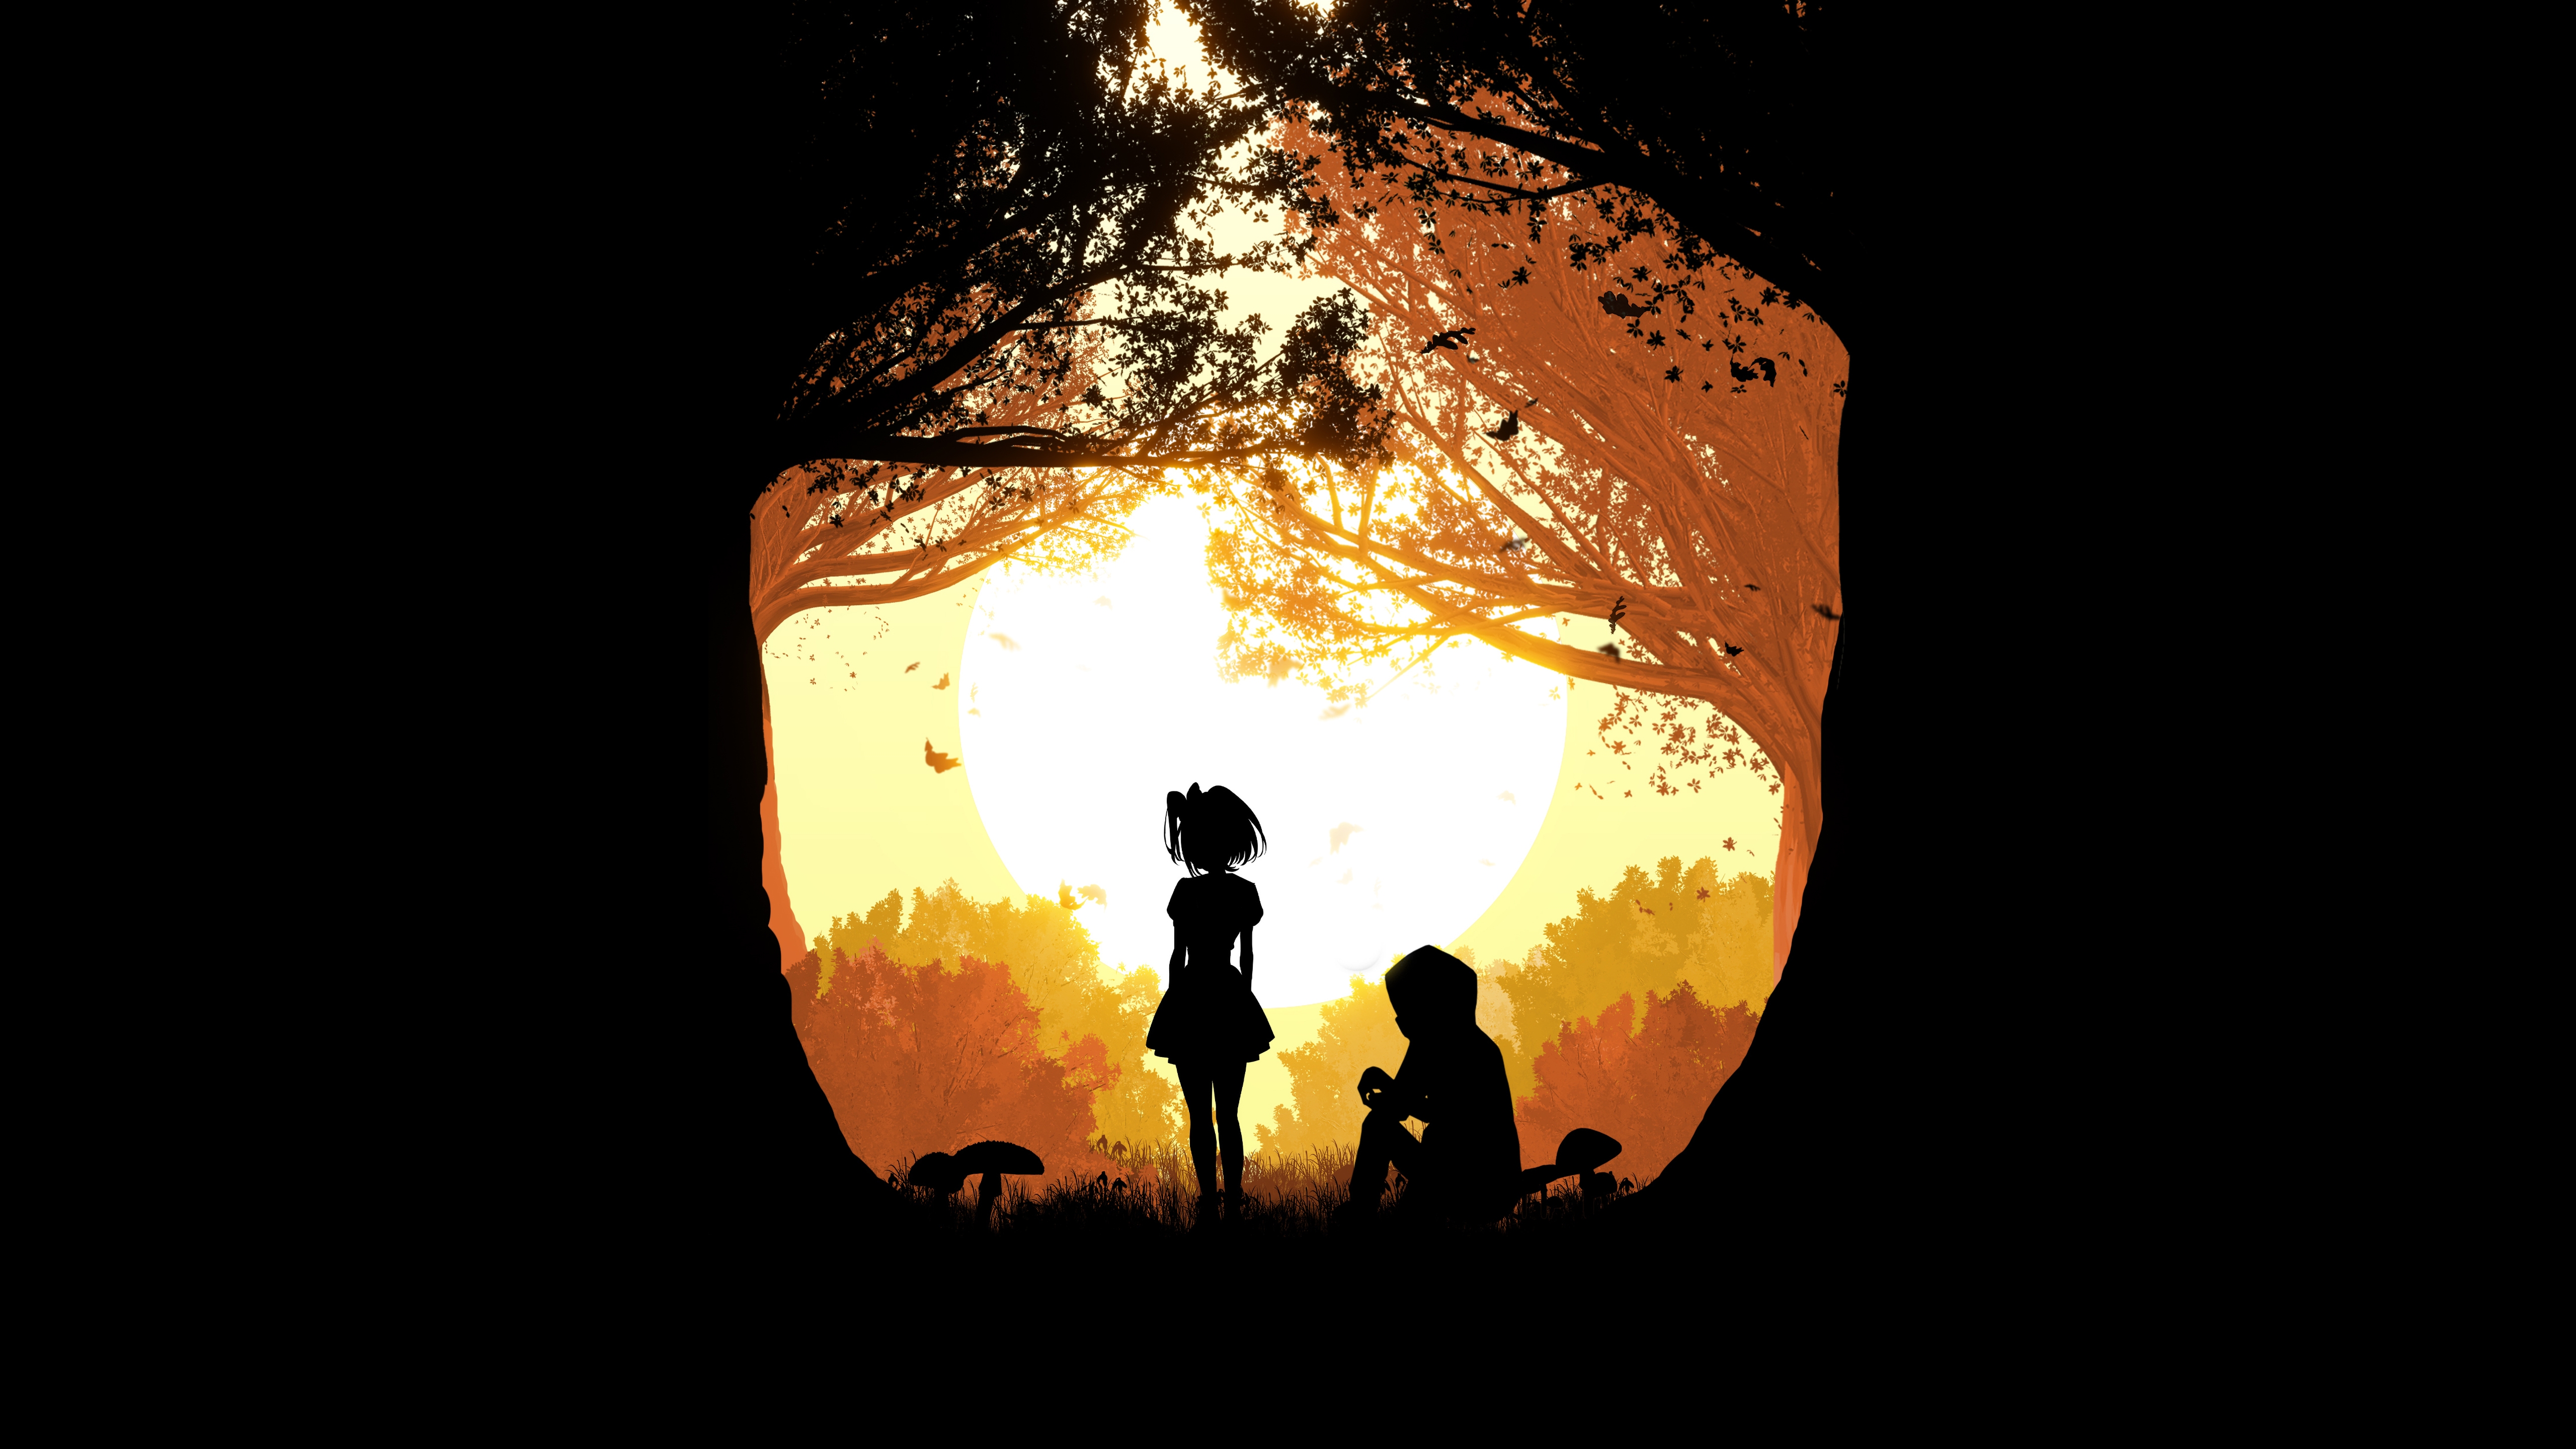 HD wallpaper, Forest, Simple, Girl, Sunset, Boy, 5K, Silhouette, Couple